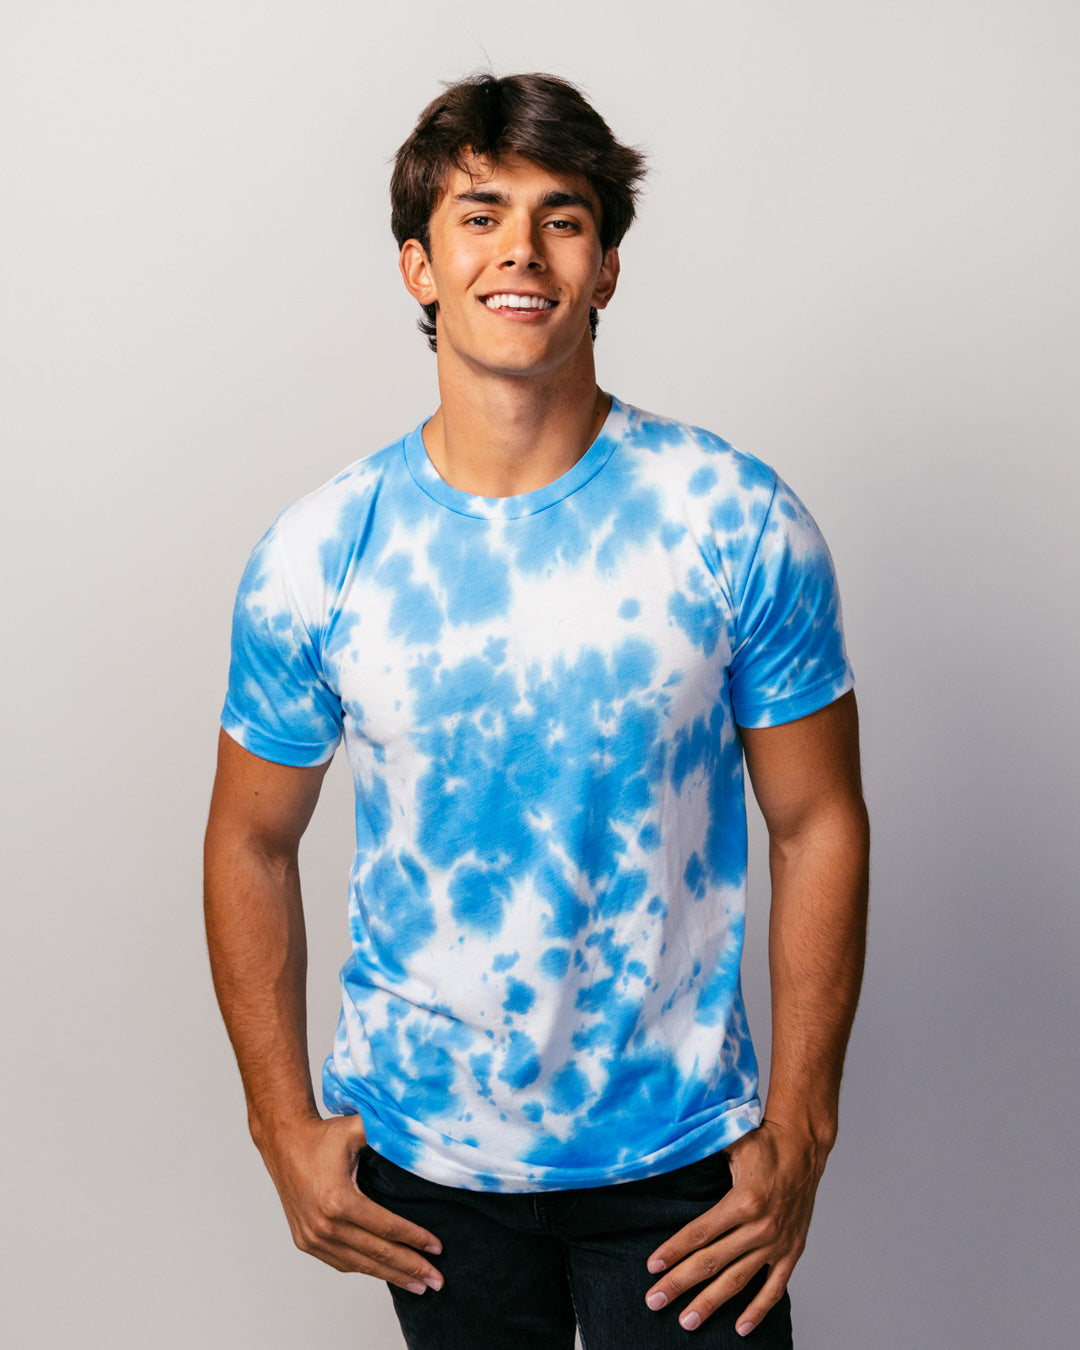 Blue and White Tie Dye Unisex Essential T-Shirt | Charlie Hustle 39 / XS